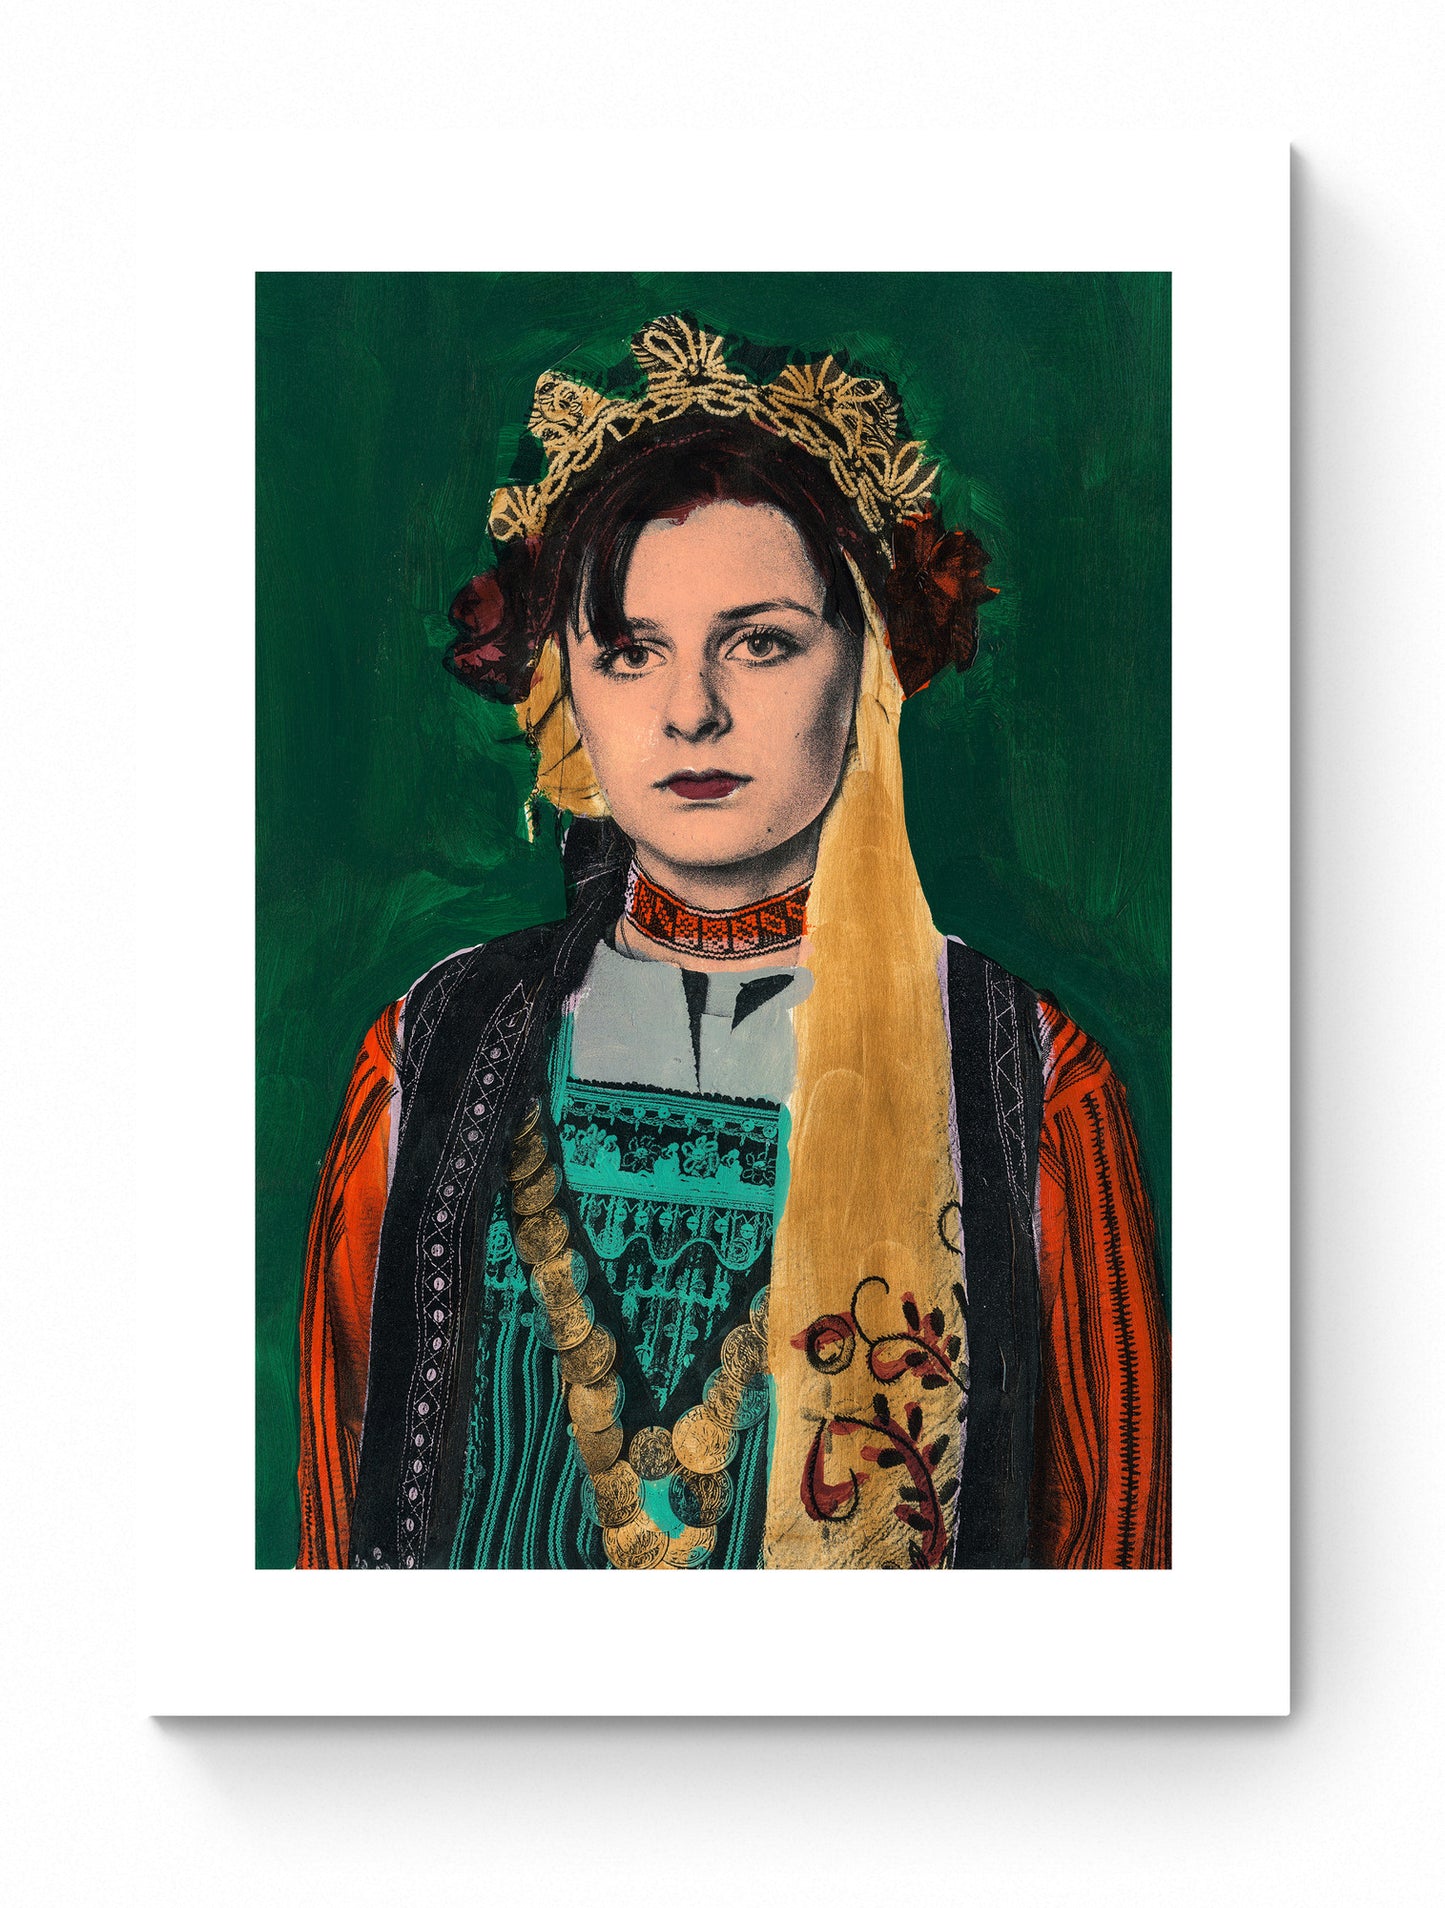 Painting Pop Art Wall Art from Greece | Dark Green Metaxades Costume from Evros, Thrace, by George Tatakis - poster